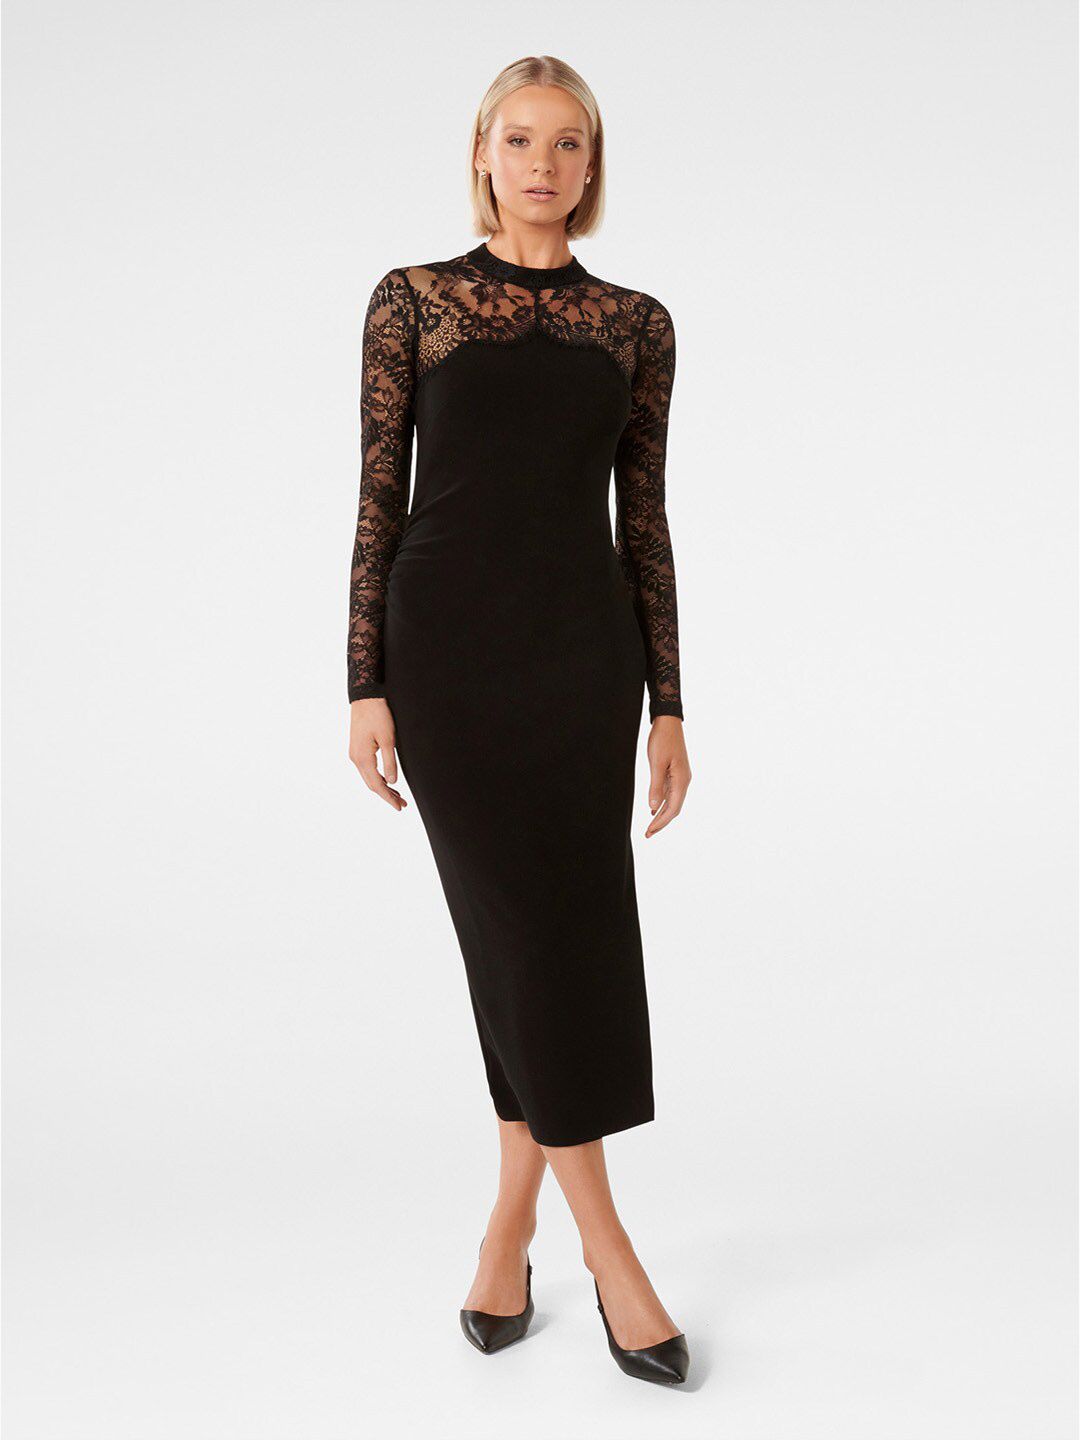 Forever New Round Neck Long Sleeves Lace Inserts Bodycon Midi Dress Price in India